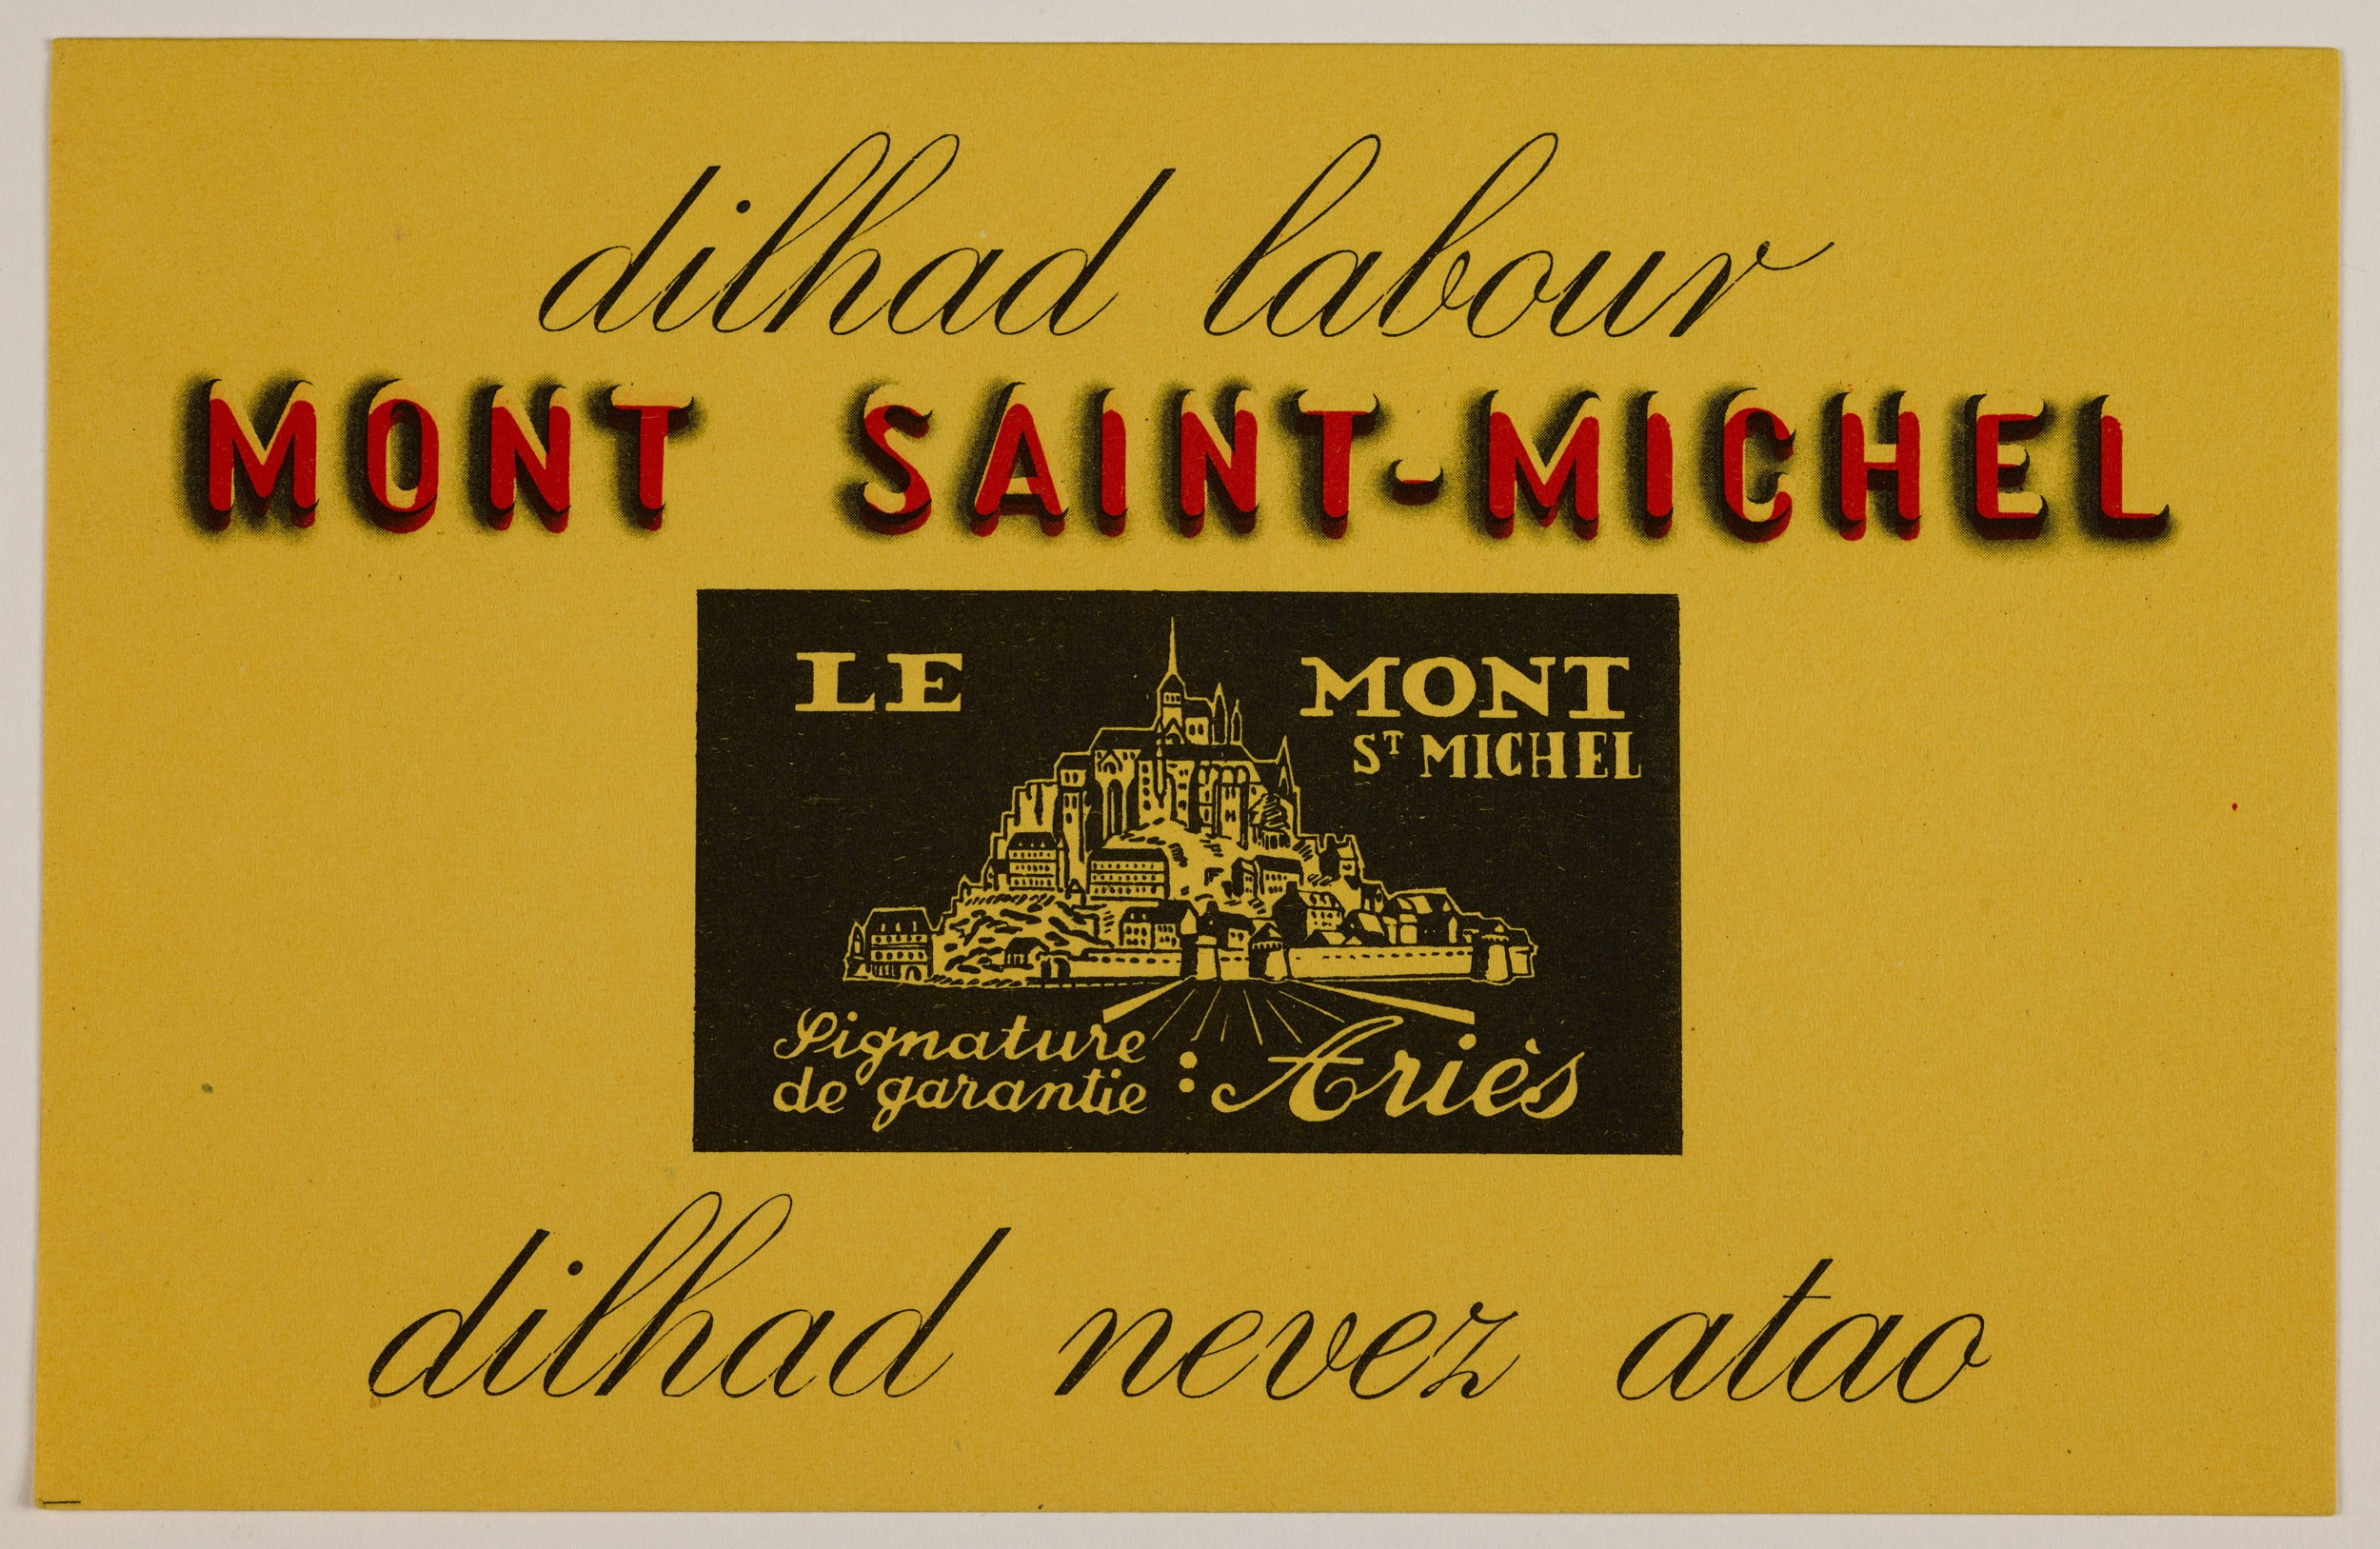 Advertisement in Breton from brand Le Mont-Saint-Michel Ariès.  “Workwear: always like new!” Source: Collections Musée de Bretagne. Inventory number: 983.0075.33.3